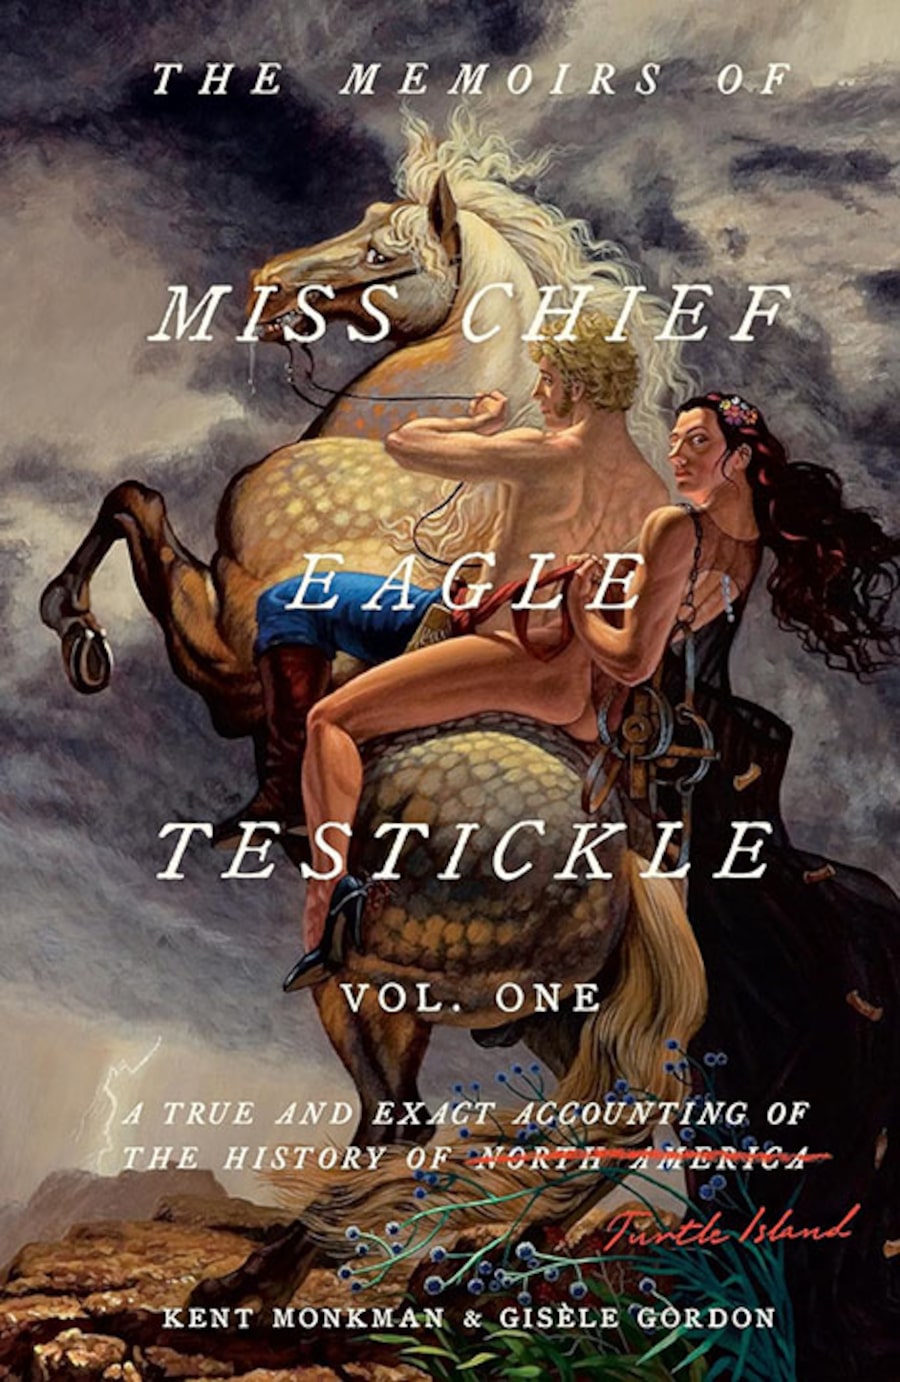 The Memoirs of Miss Chief Eagle Testickle